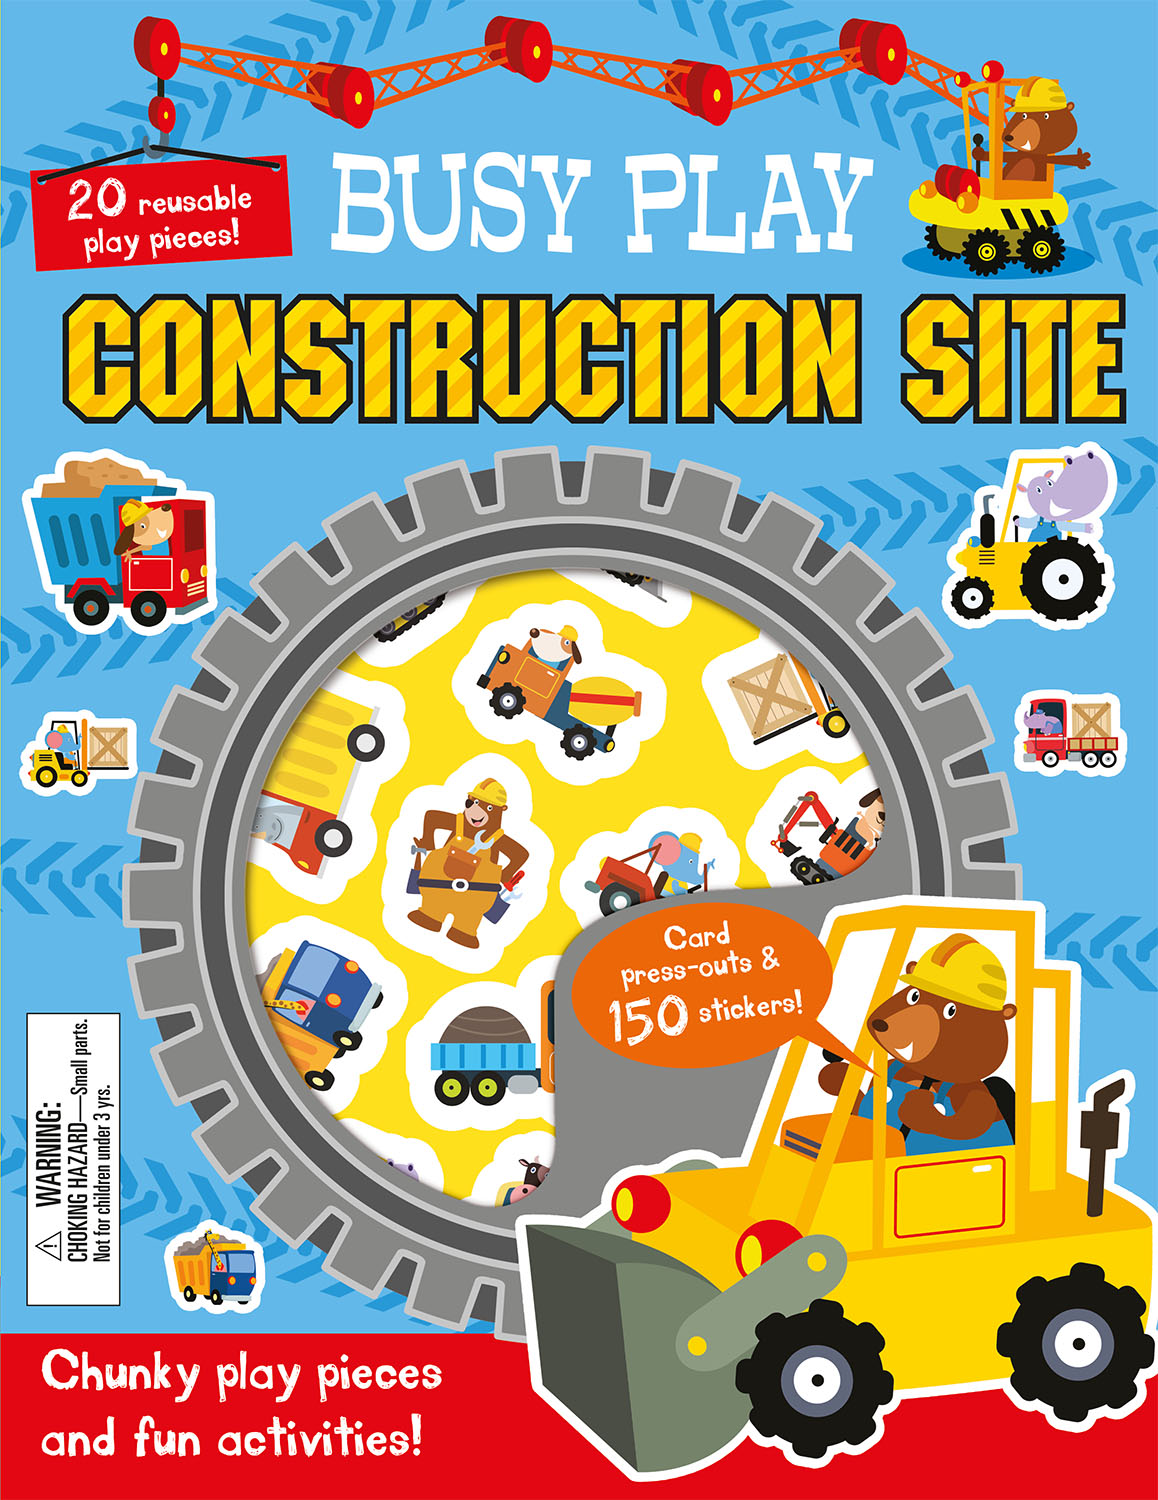 BUSY PLAY CONSTRUCTION SITE